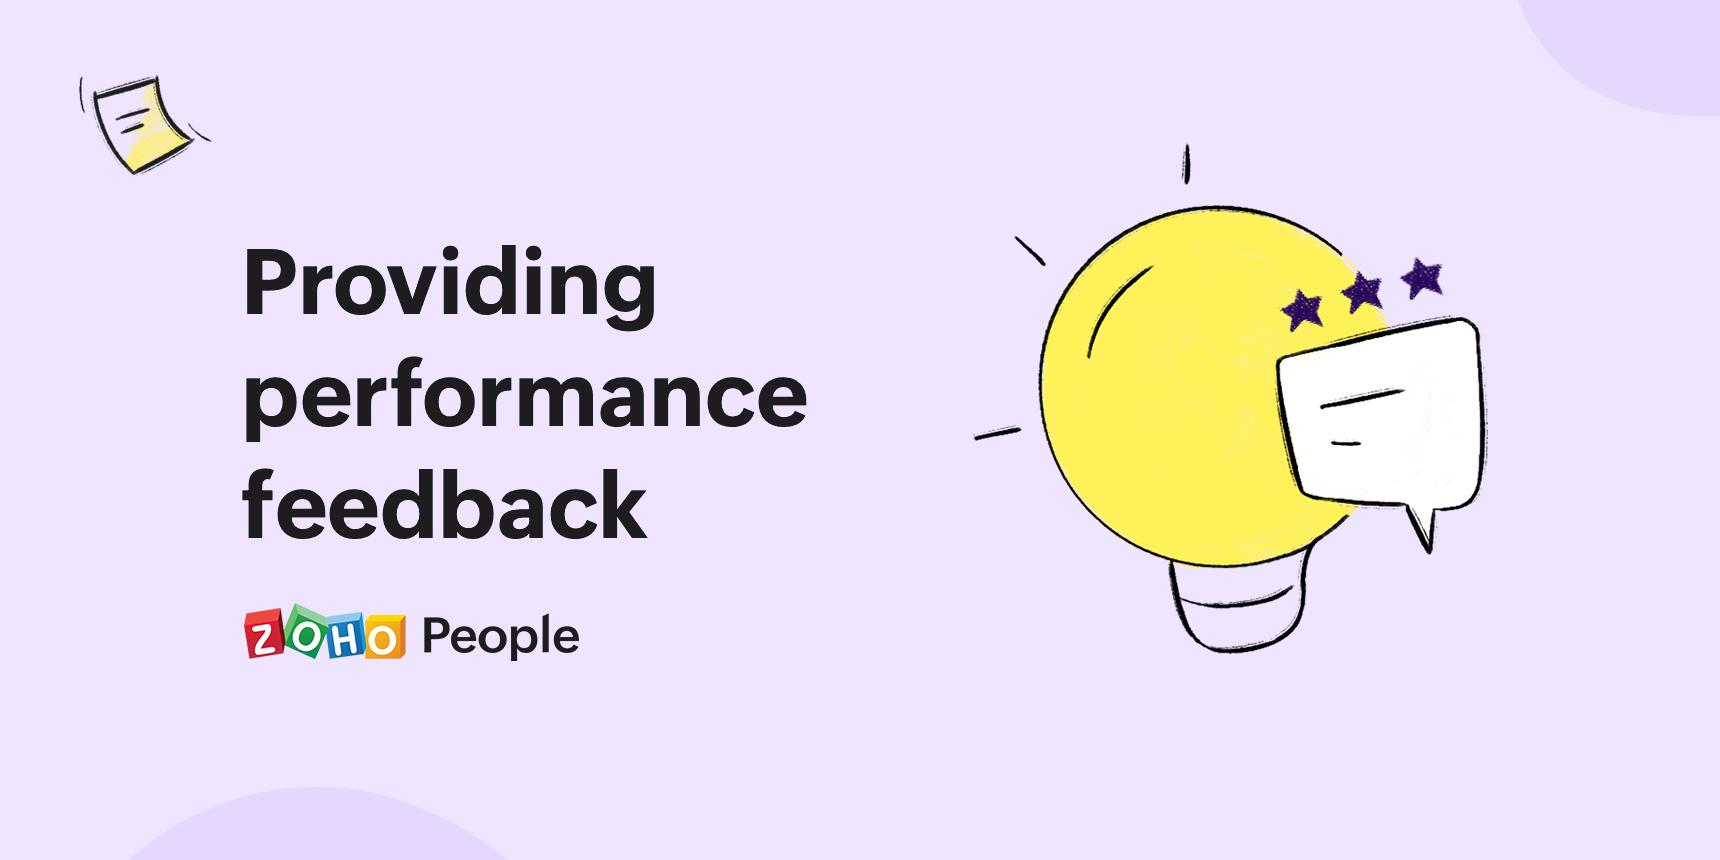 Tips to provide performance feedback